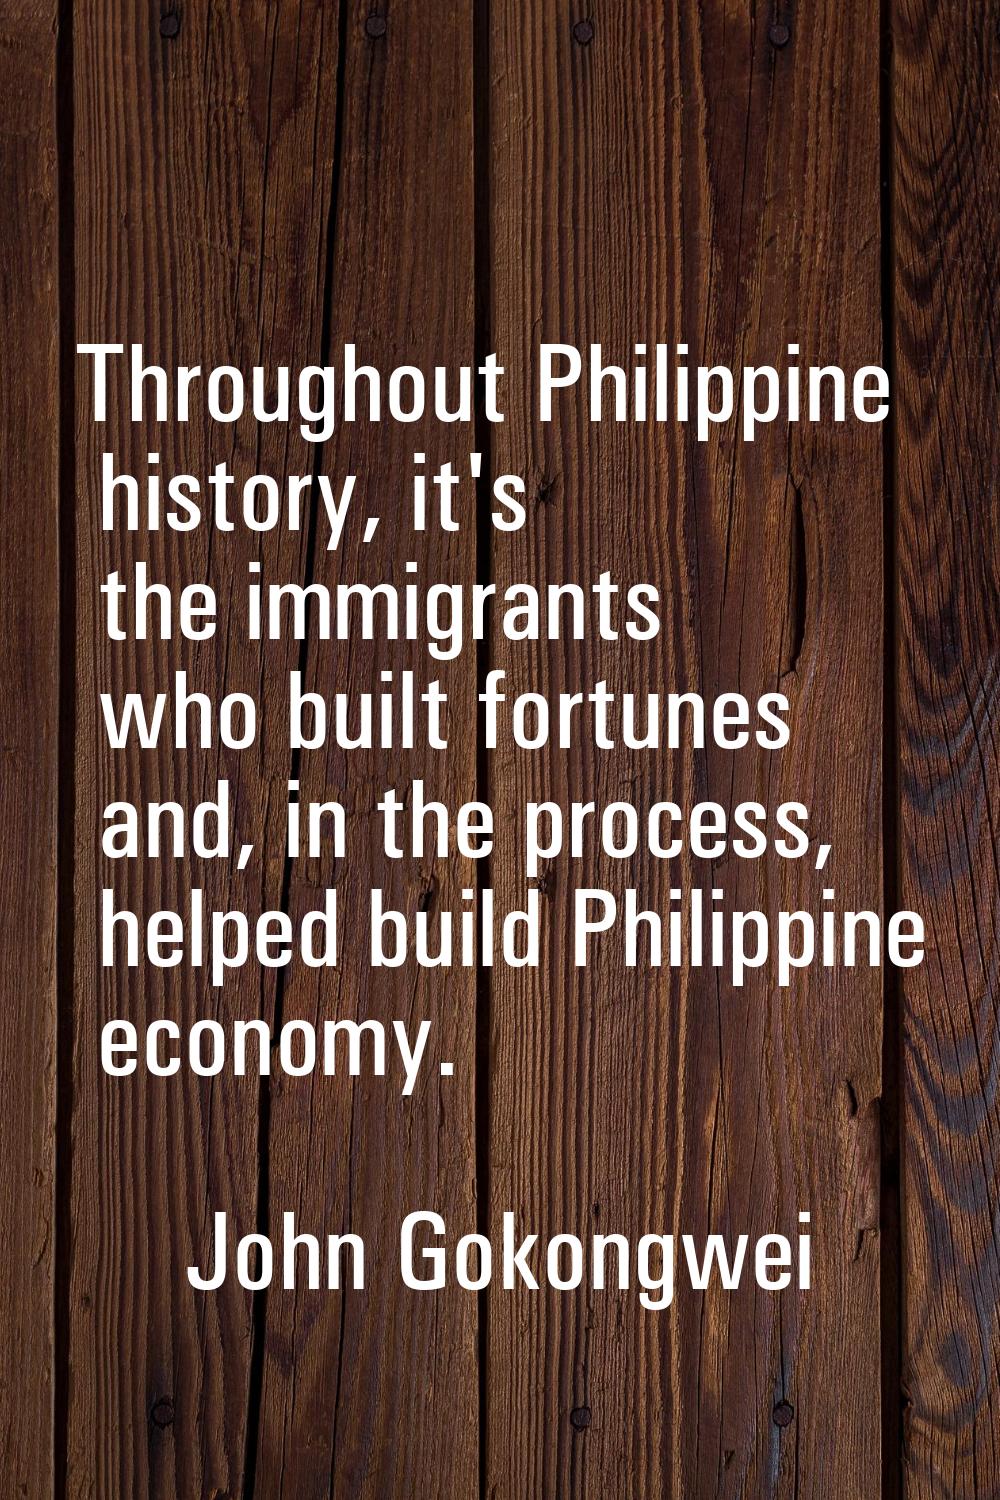 Throughout Philippine history, it's the immigrants who built fortunes and, in the process, helped b